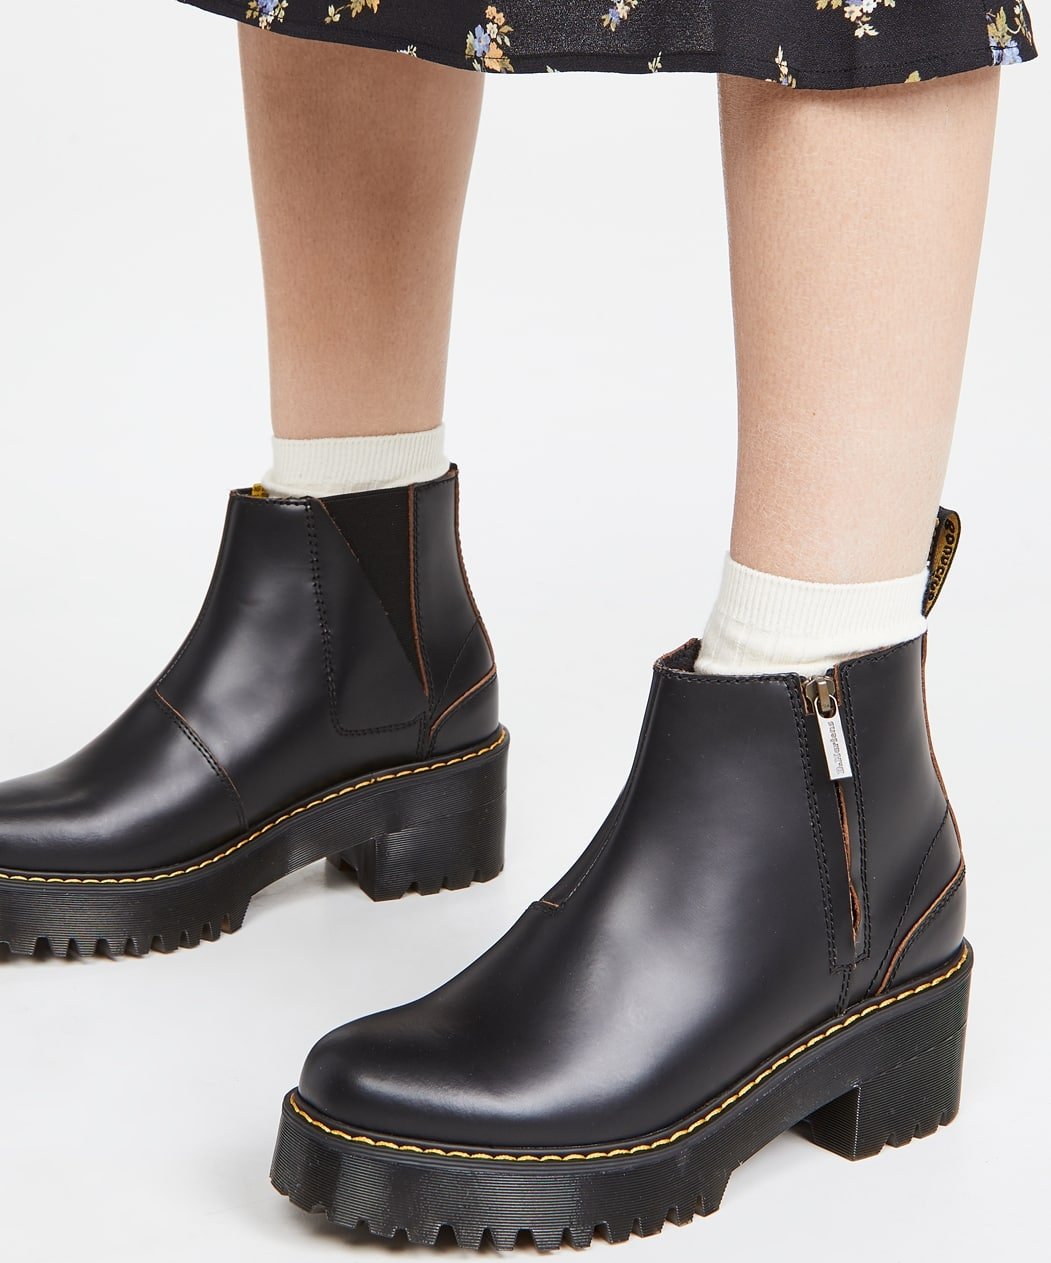 These black Dr. Martens boots feature a stacked platform and the label's signature yellow stitching